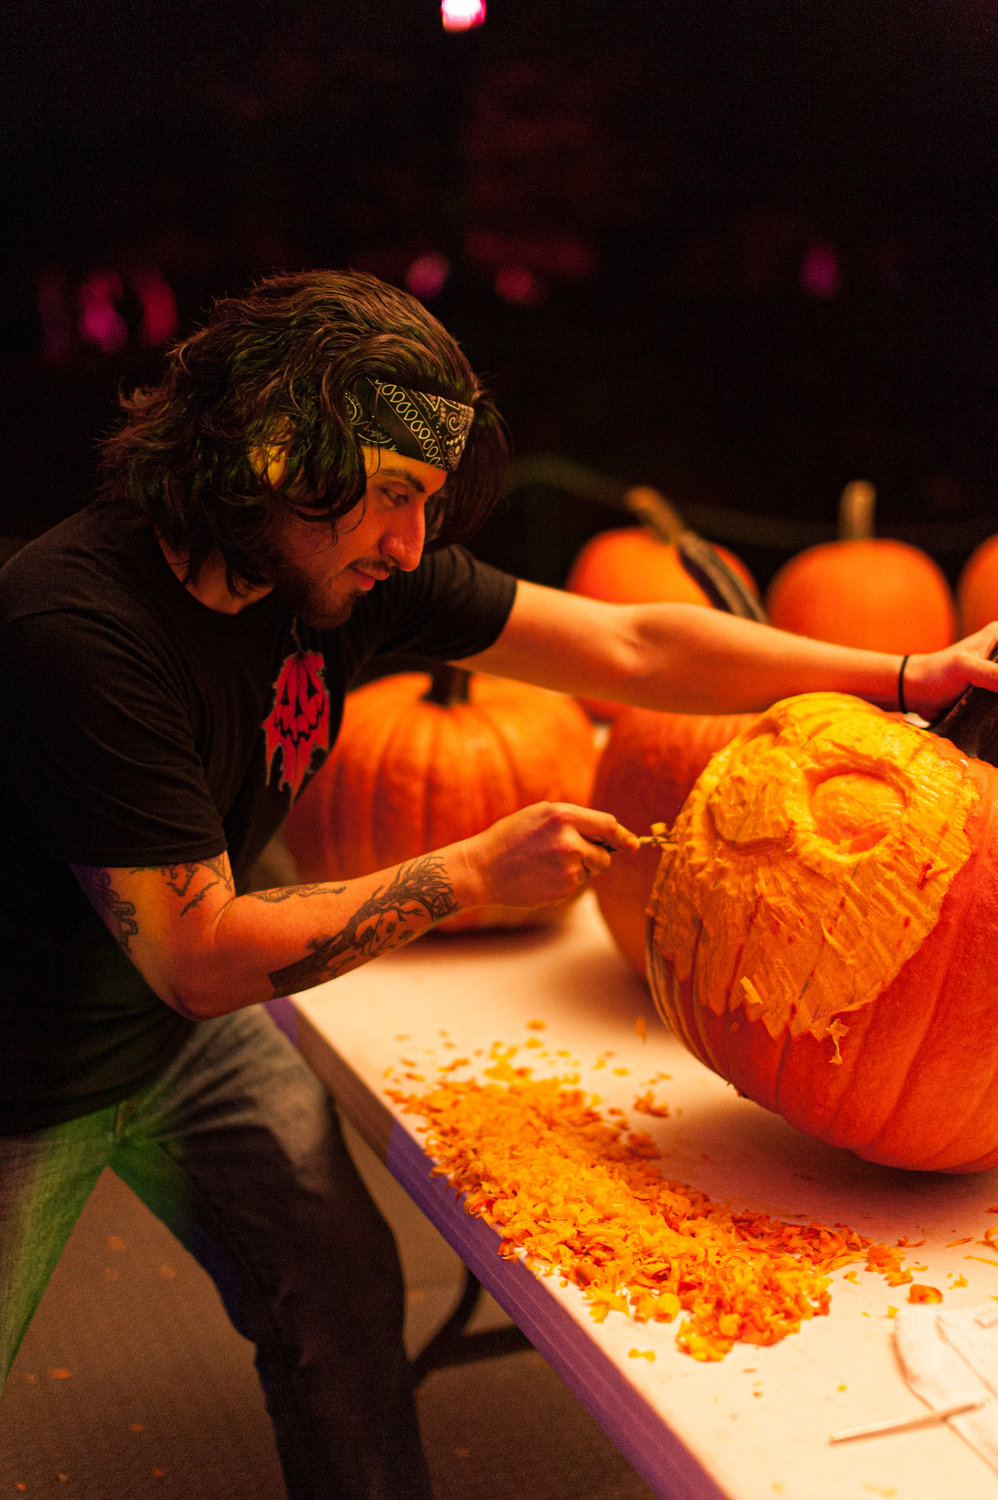 Artist and Pumpkin Carver Will Teran of Art Through Hammer Productions working on his latest masterpiece.